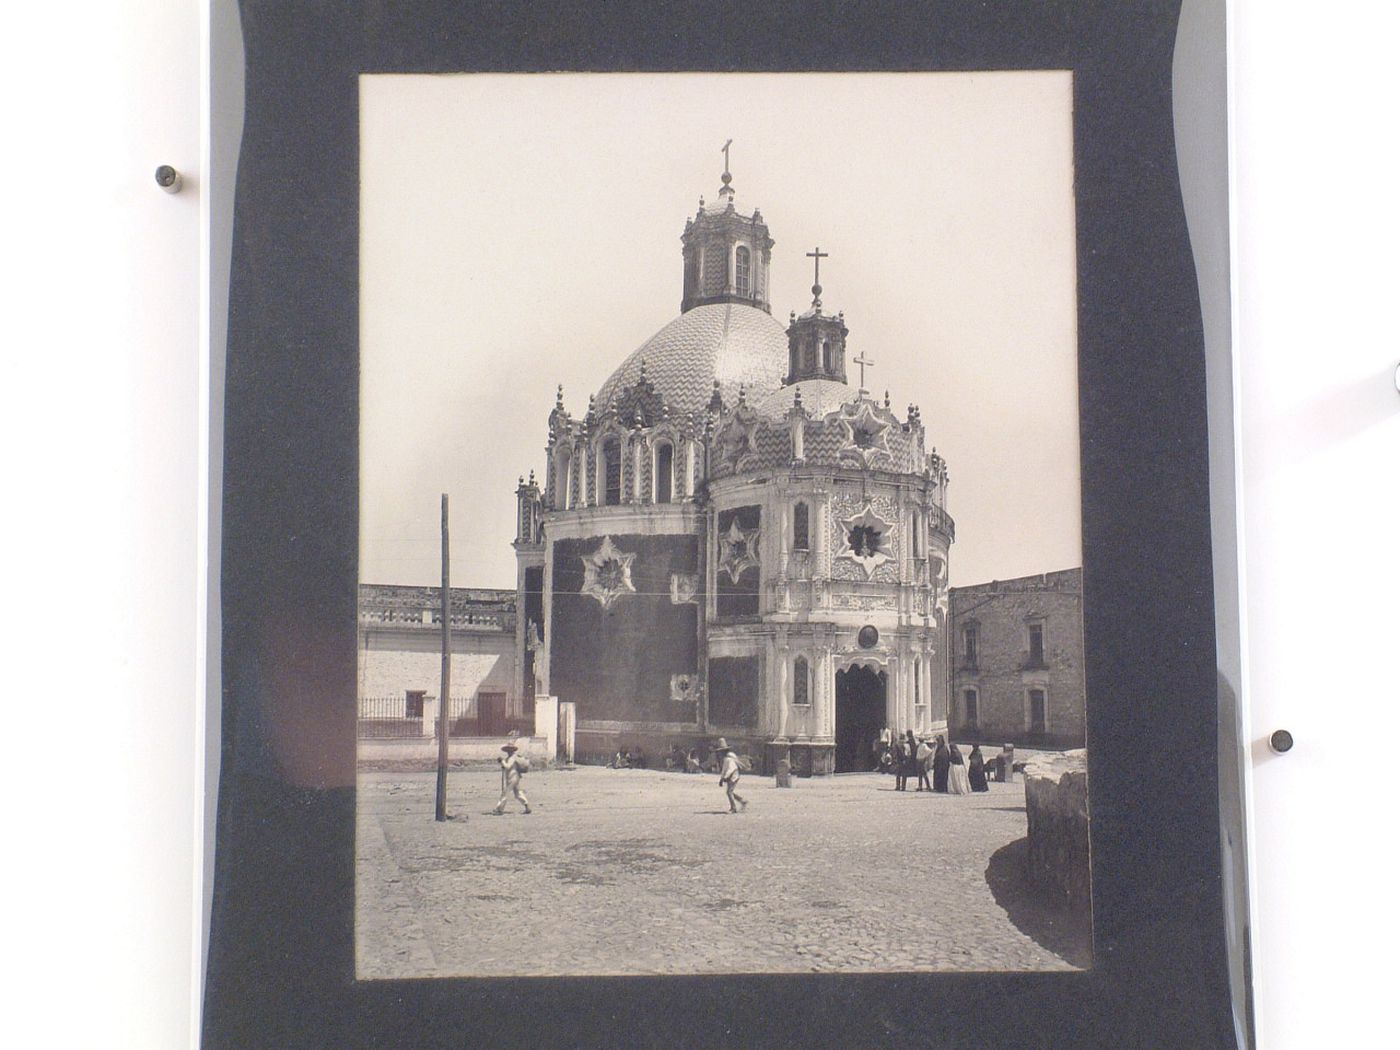 View of the Capilla del Pocito showing a square in the foreground with people throughout, Guadalupe Hidalgo (now Gustavo A. Madero, in Mexico City), Mexico